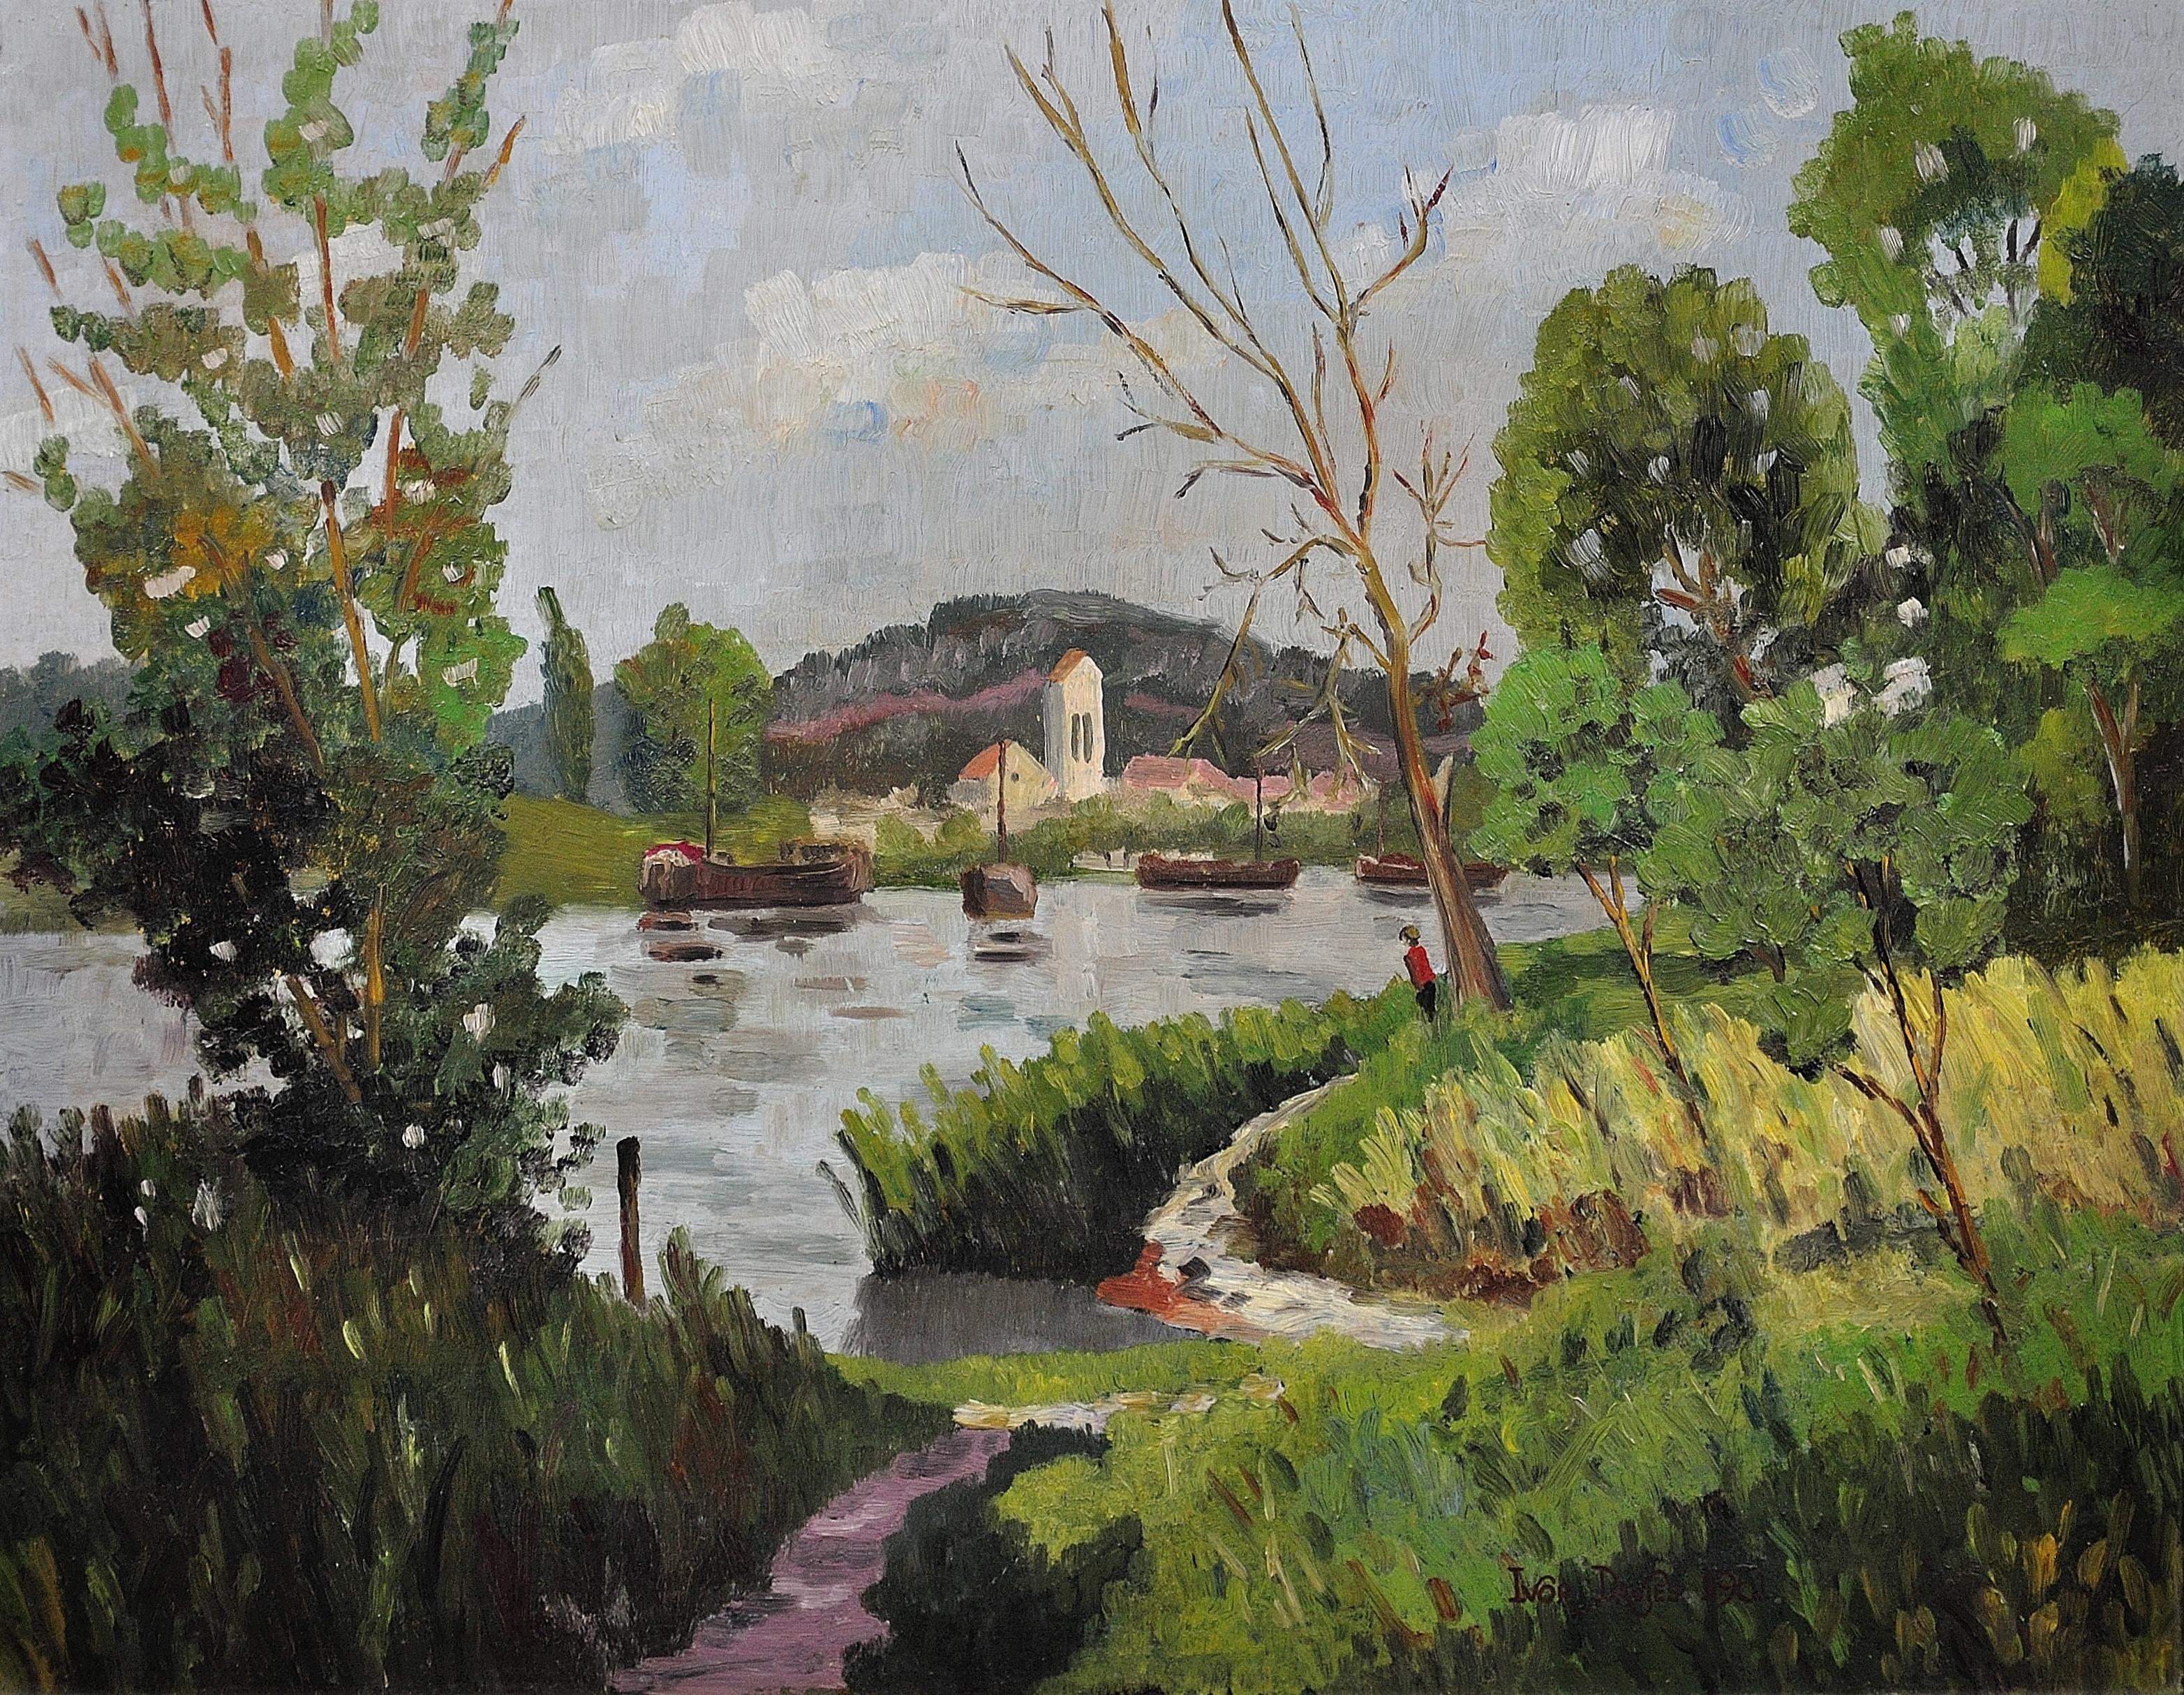 Decorative Mid 20th Century Oil Painting 
River Landscape
Signed Ivor Davies. Dated 1961. 
Oil on Board.
Image size 16.9 inches x 21.3 inches ( 43cm x 54cm ).
Frame size 21.3 inches x 25.6 inches ( 54cm x 65cm ). 

Available for sale; this original